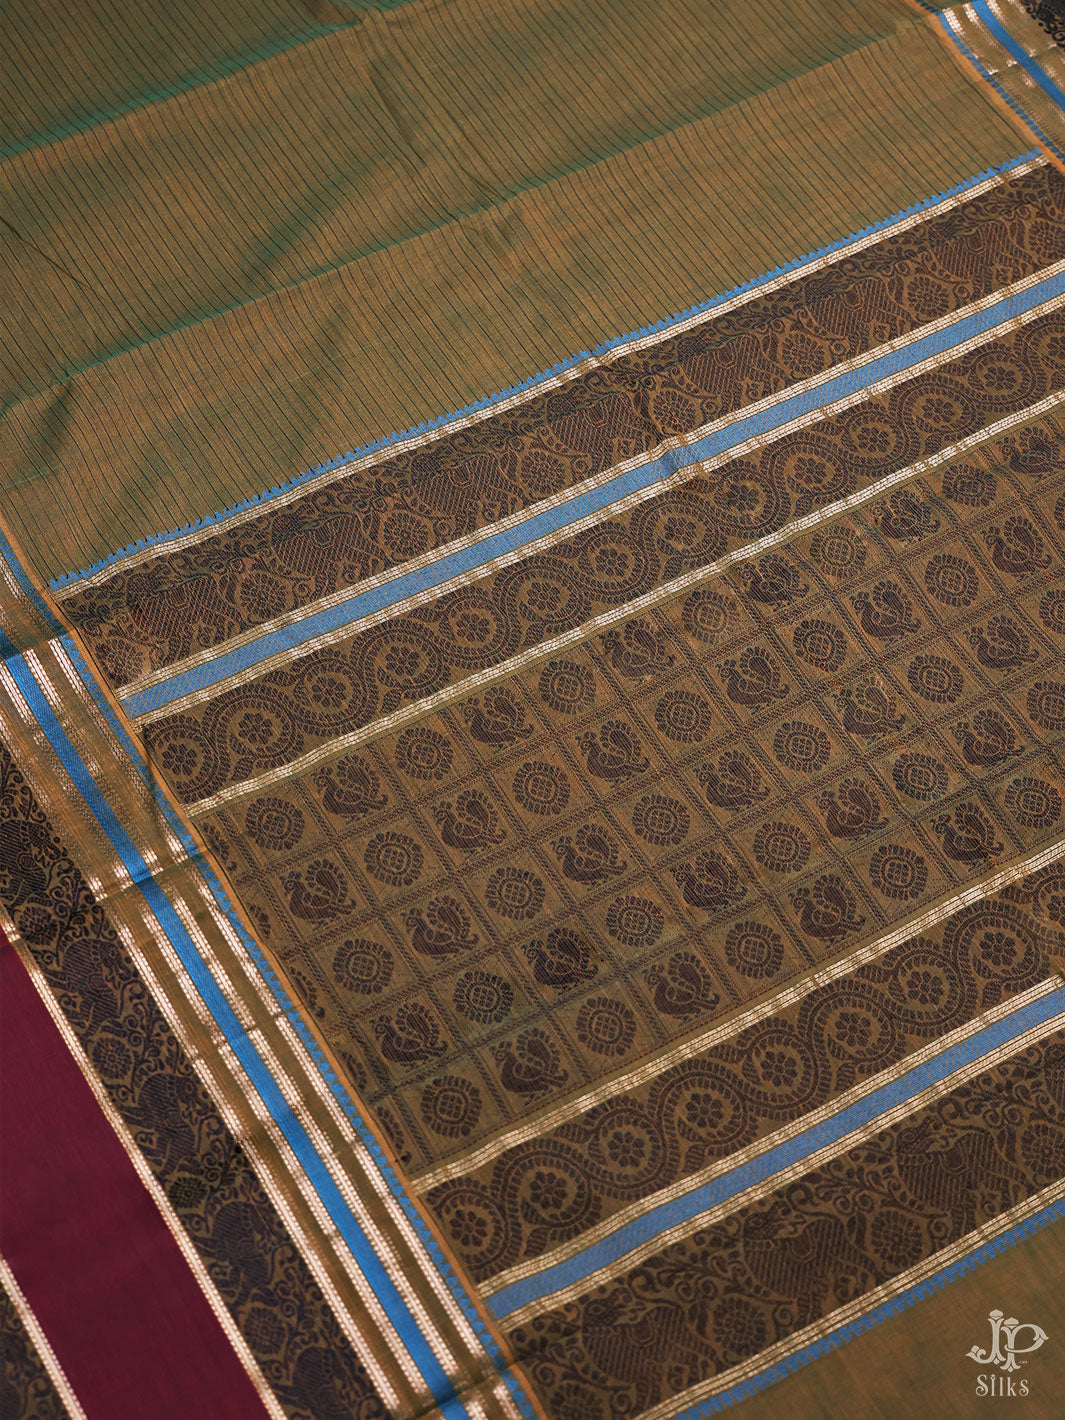 Olive Green and Maroon Pure Kanchi Cotton Saree - D9750 - View 4